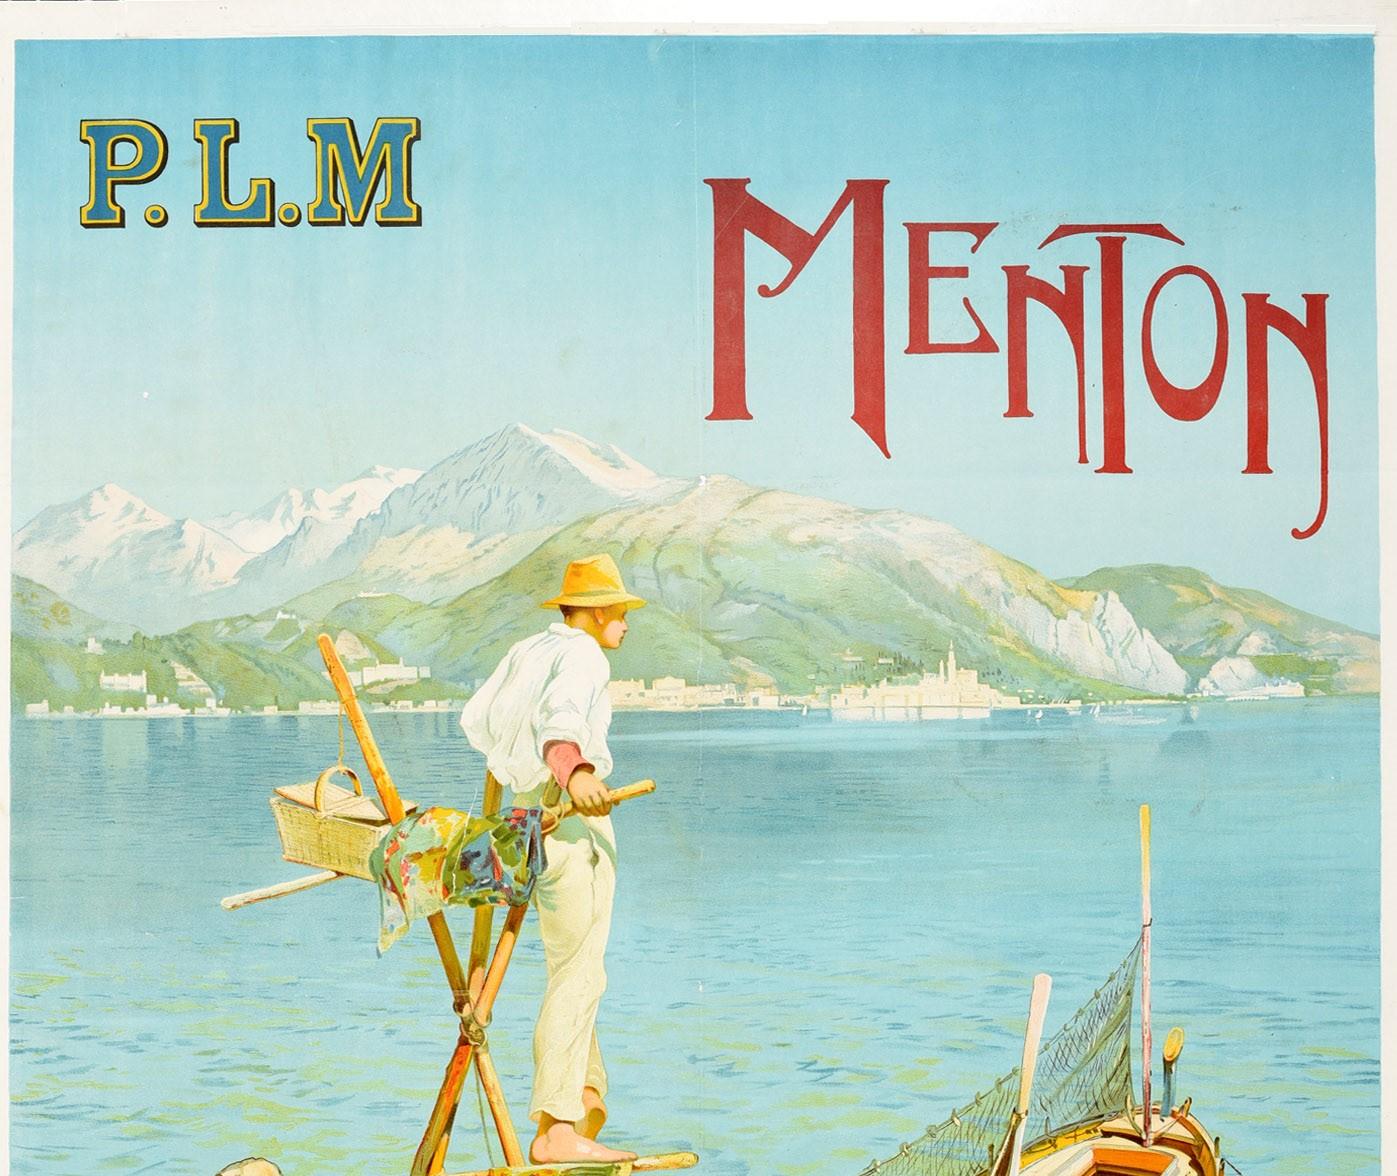 Original antique travel poster for Menton issued by the Paris Lyon Mediterranee PLM railway featuring a scenic image by Ernest Louis Lessieux (1848-1925) of a man standing on a wooden structure on rocks near a wooden fishing boat and nets on the